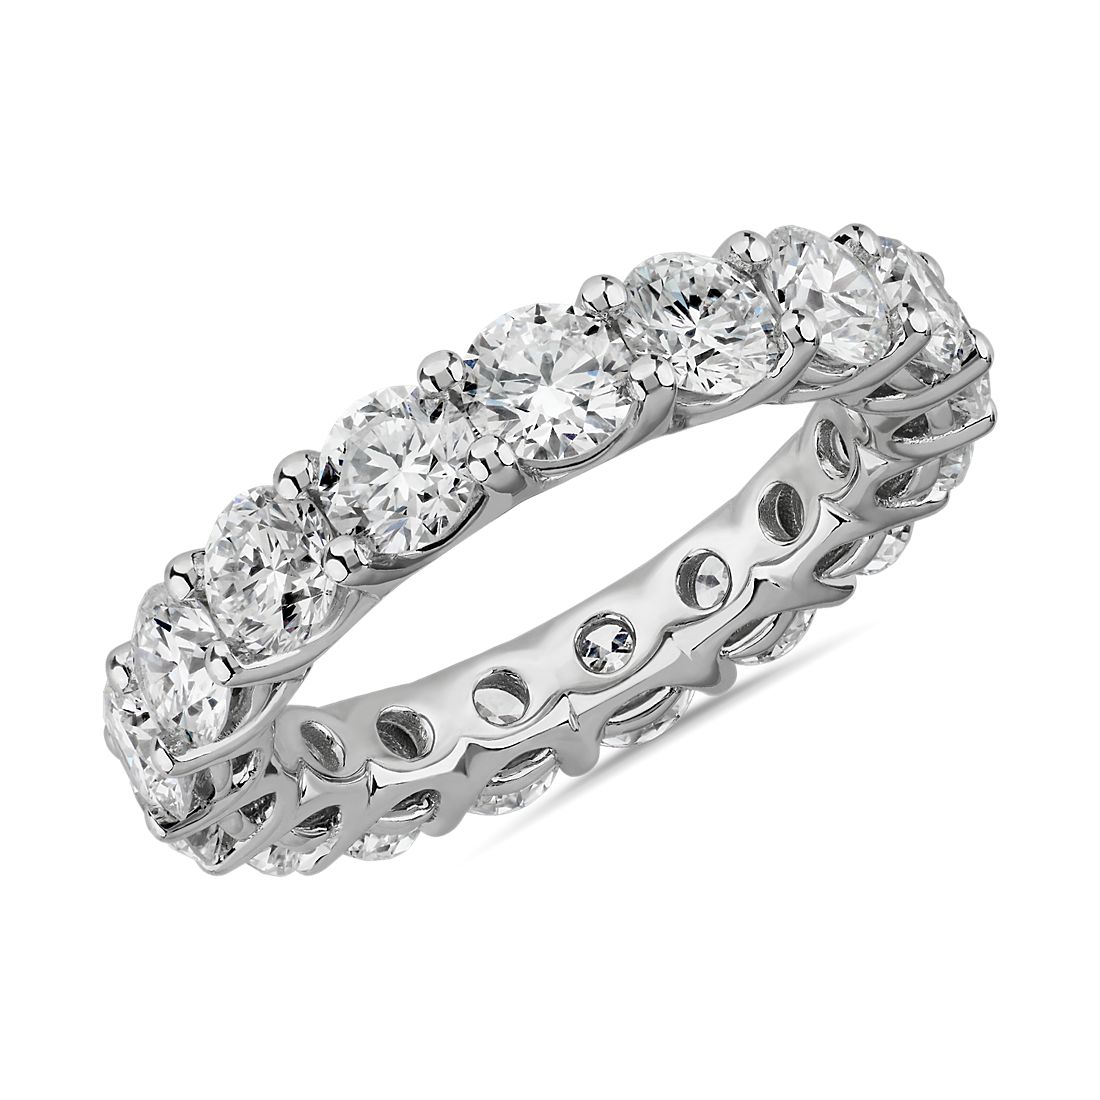 Lab Grown Diamond Low Dome Eternity Ring in 14k White Gold (3.68 ct. tw.)